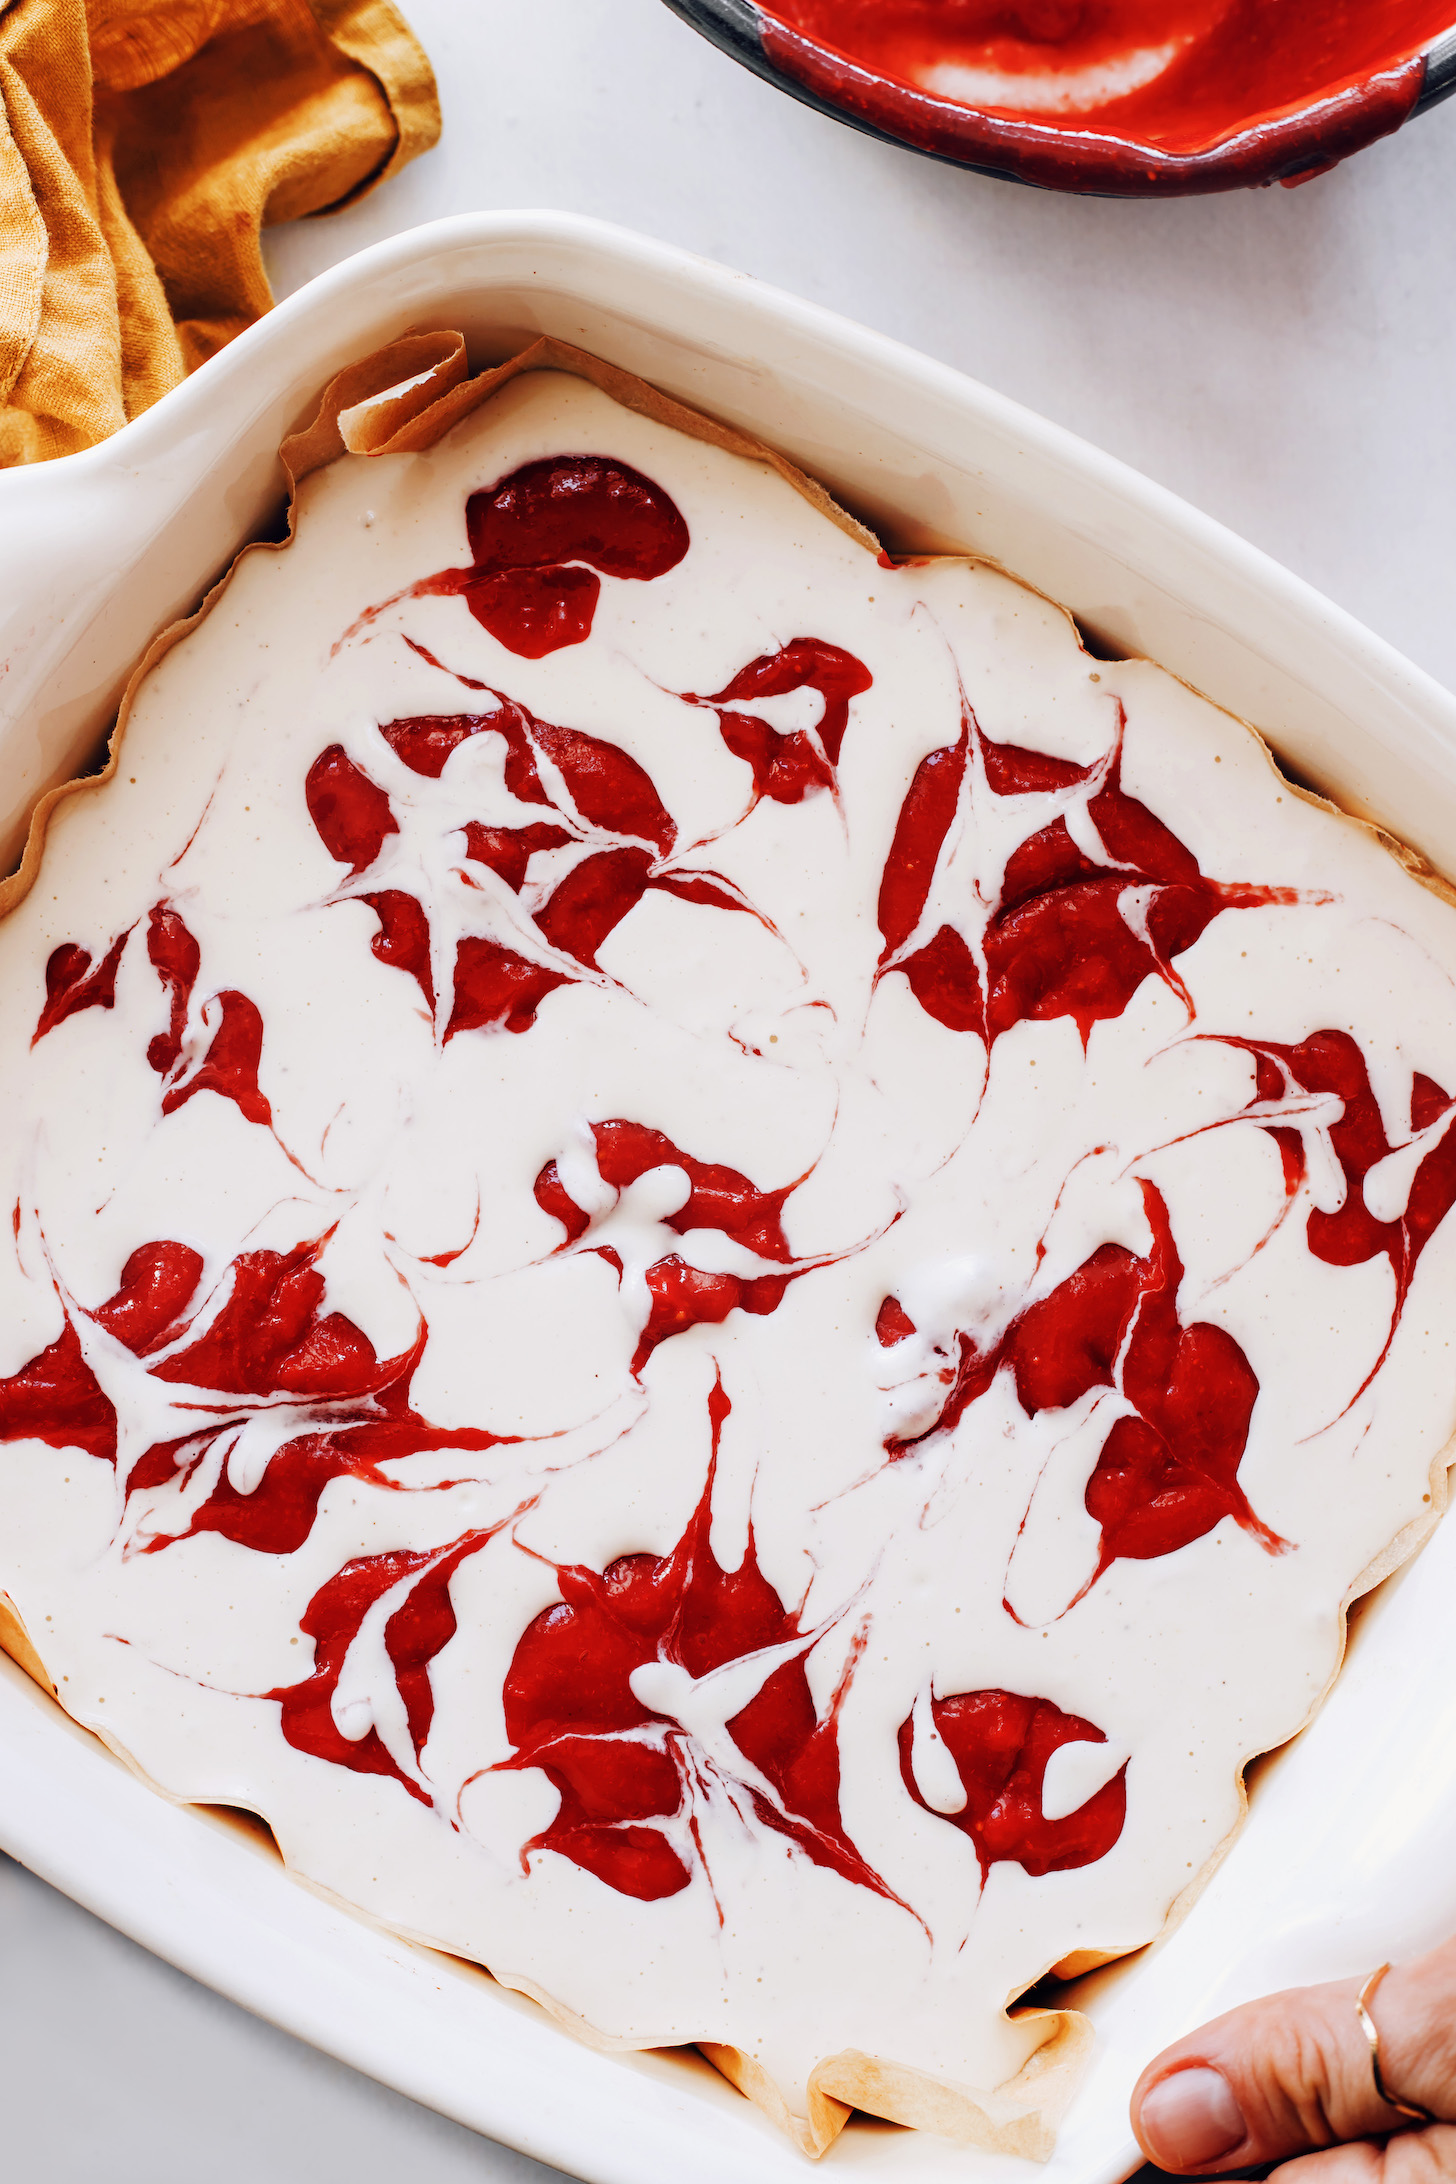 Swirls of strawberry purée in a creamy cashew cheesecake filling